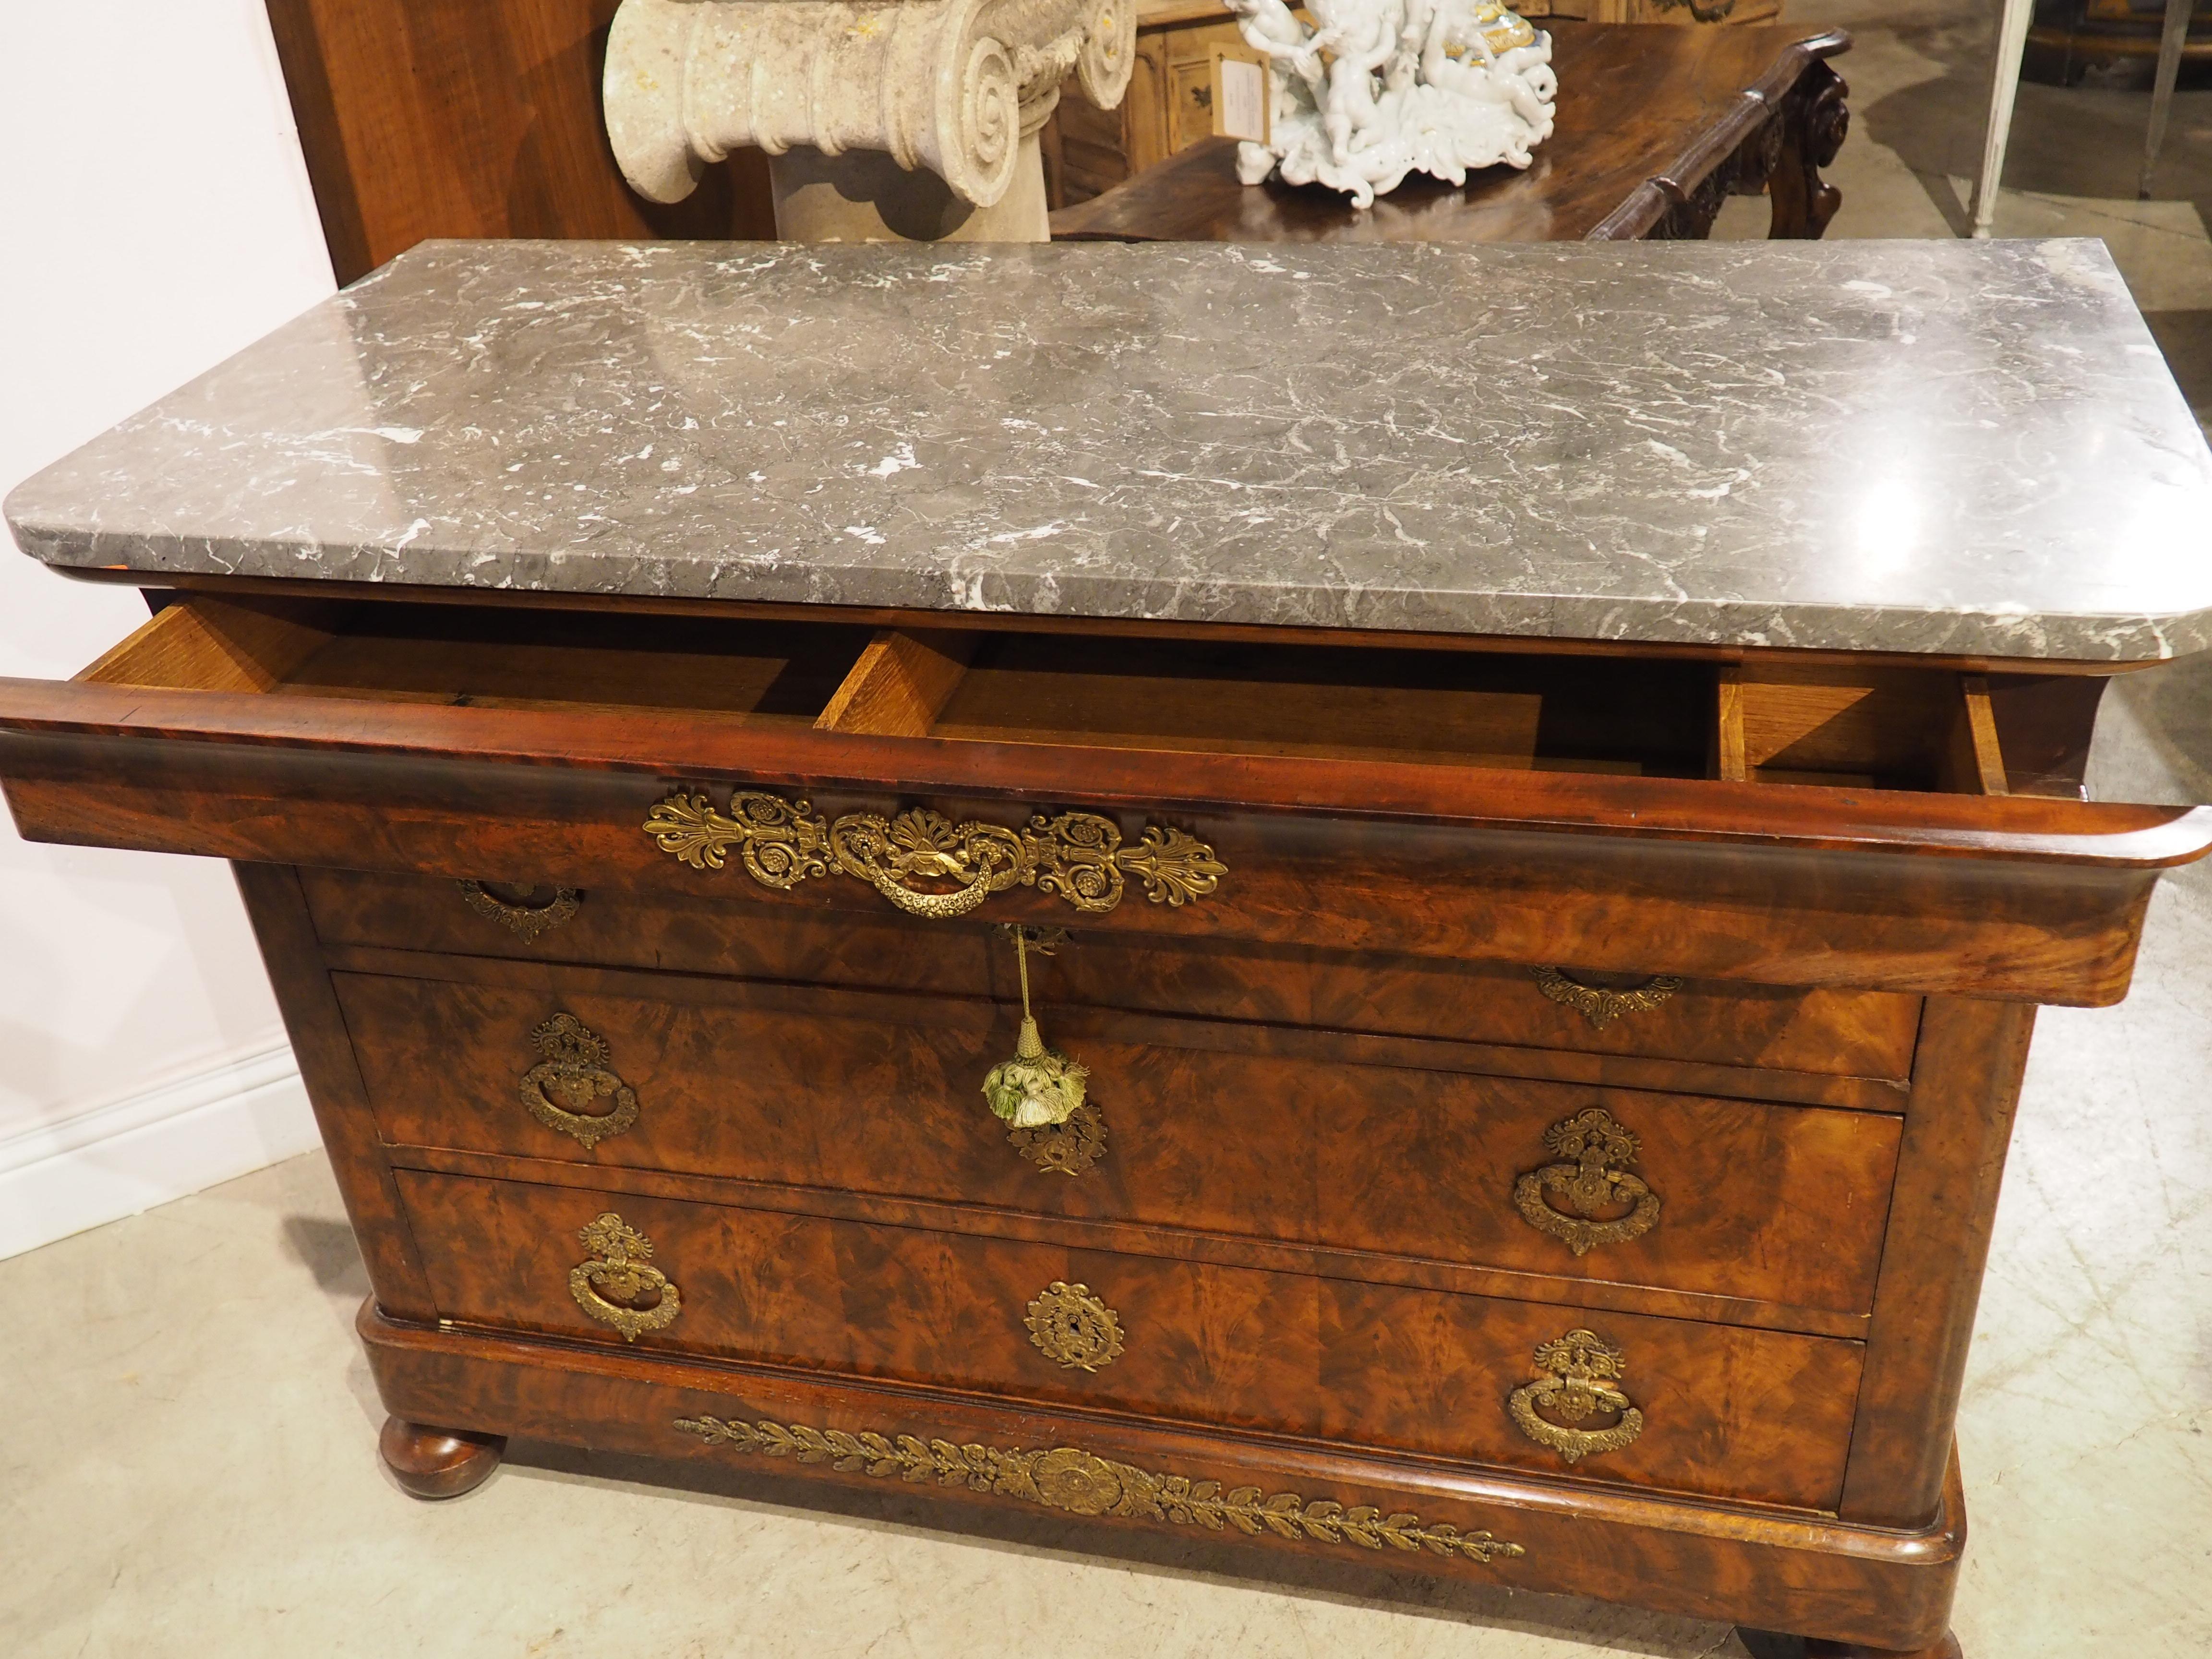 Circa 1820 French Restauration Commode in Flame Mahogany, Gilt Bronze Hardware For Sale 3